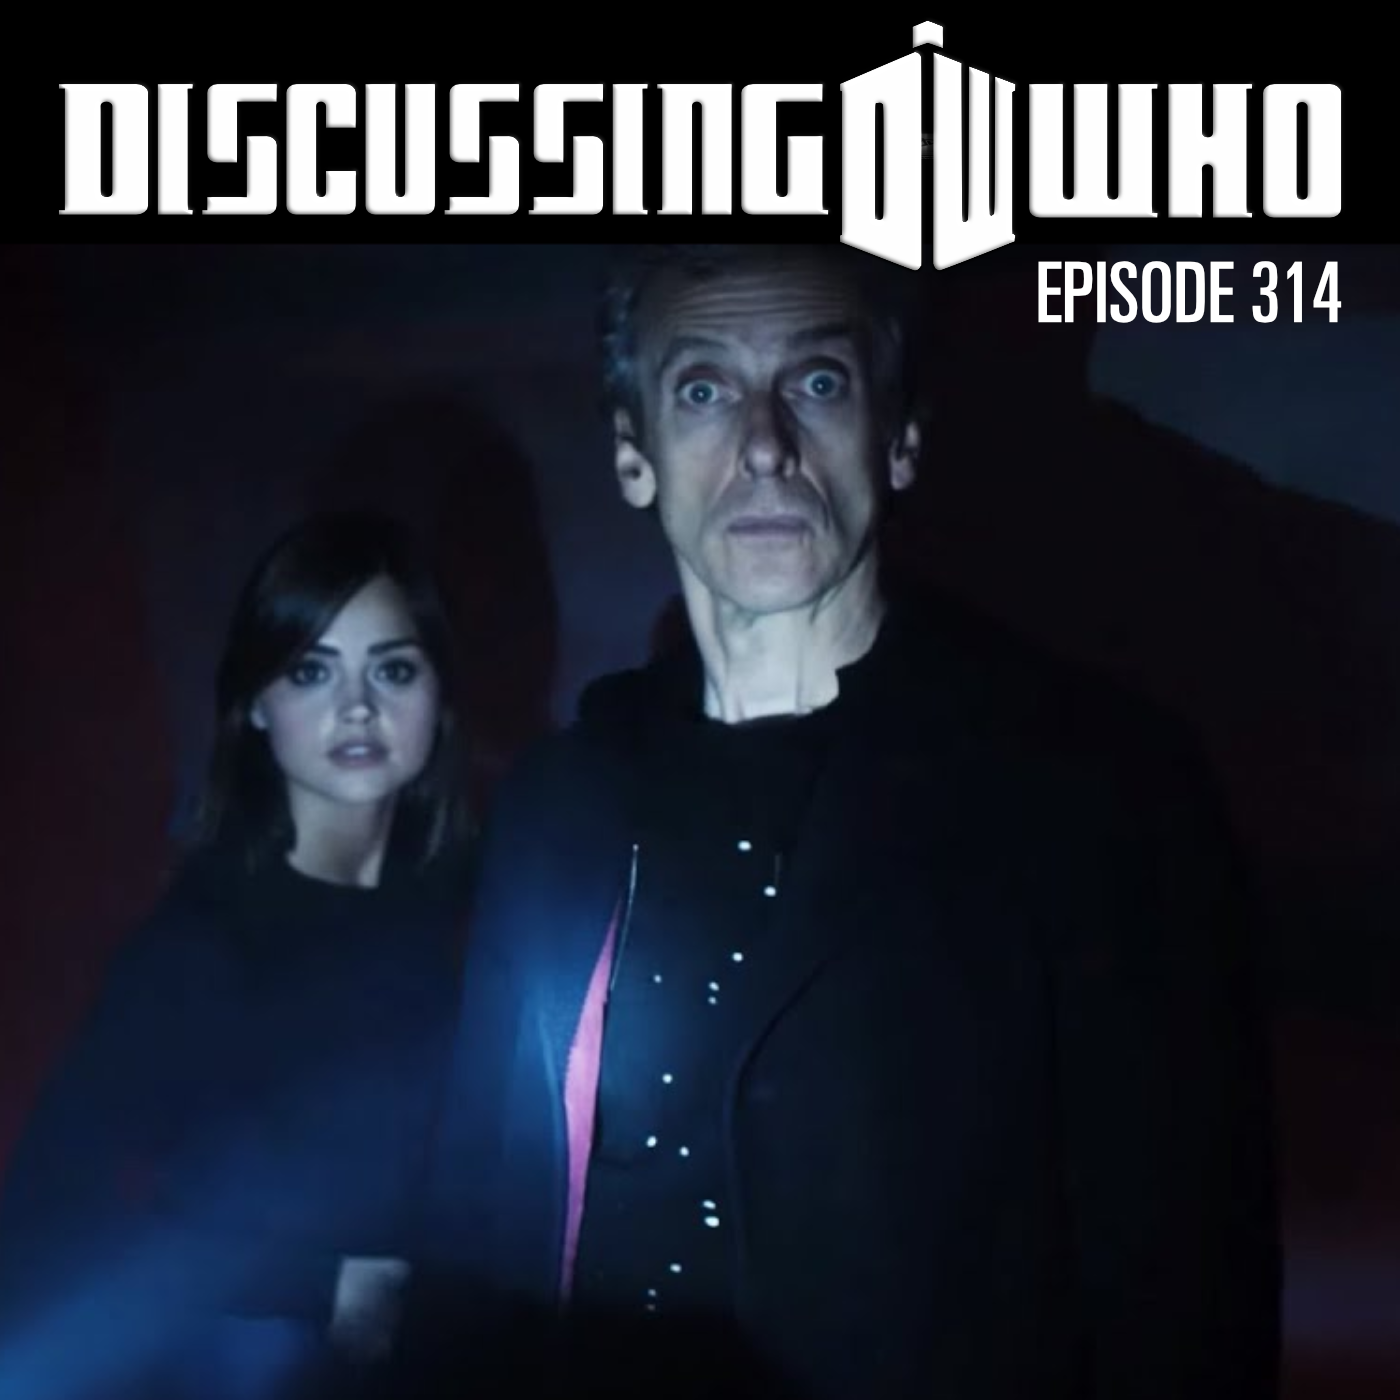 Episode 314: Review of Sleep No More, Doctor Who Series 9 Episode 9